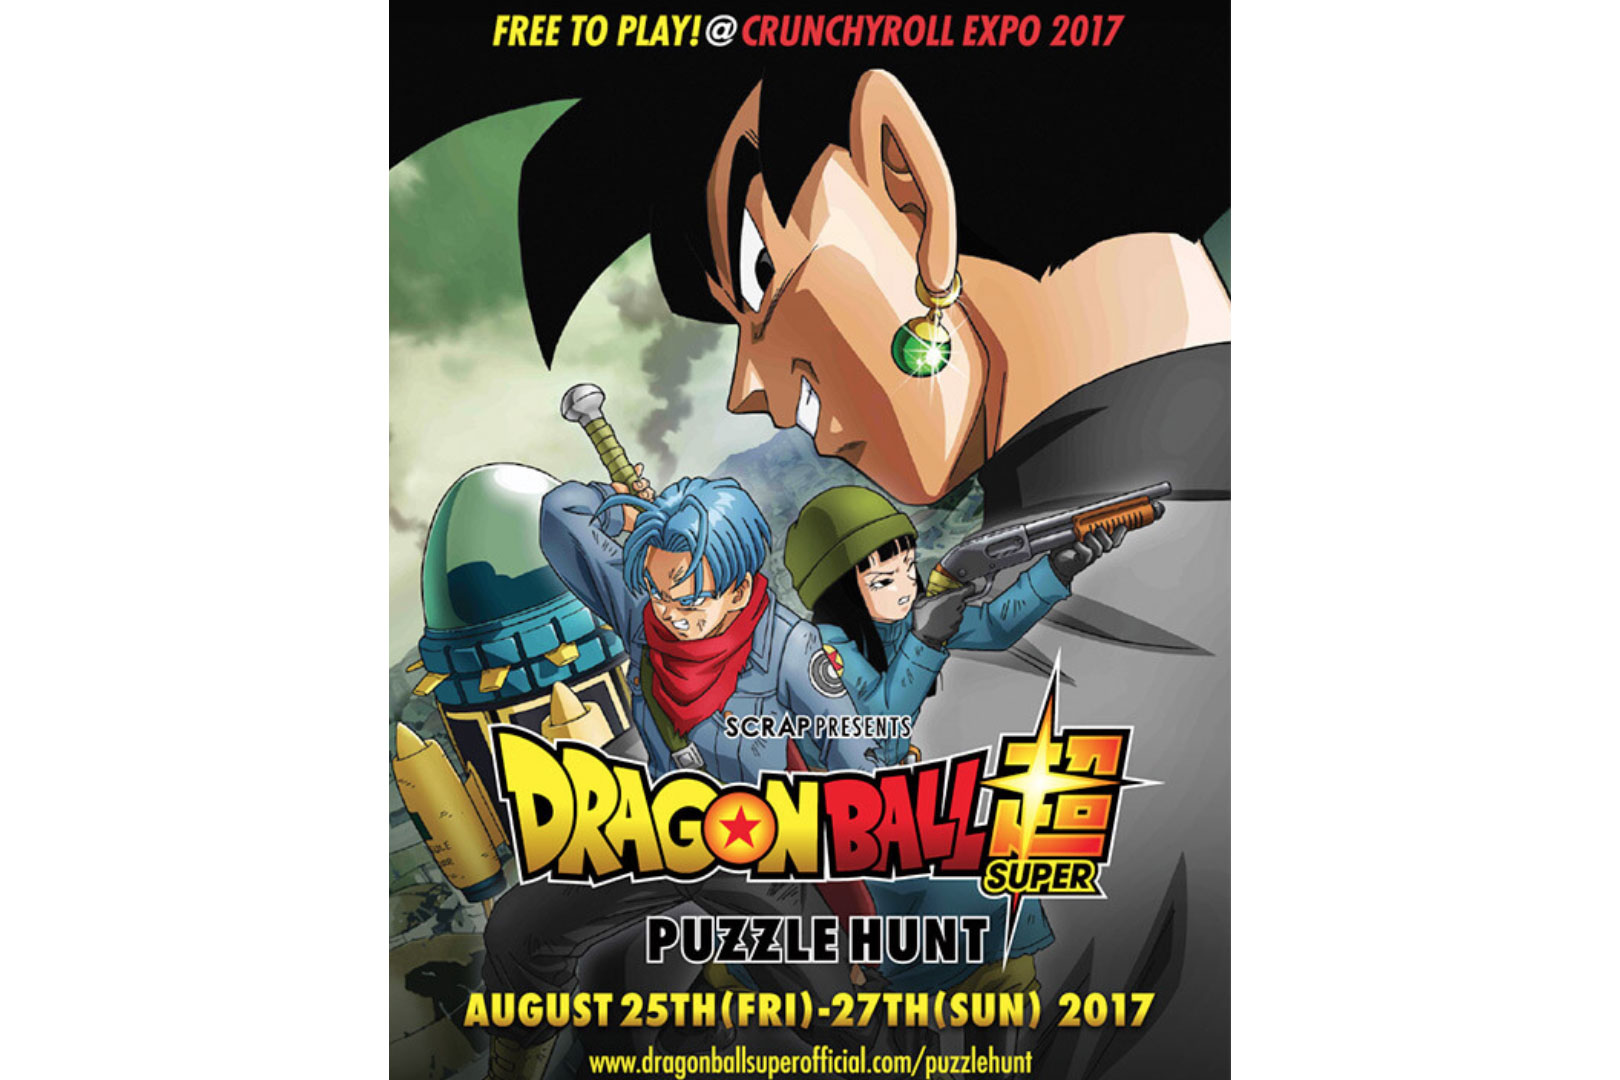 Toei Animation Inc, is bringing an interactive Dragon Ball Super experience to Crunchyroll Expo!